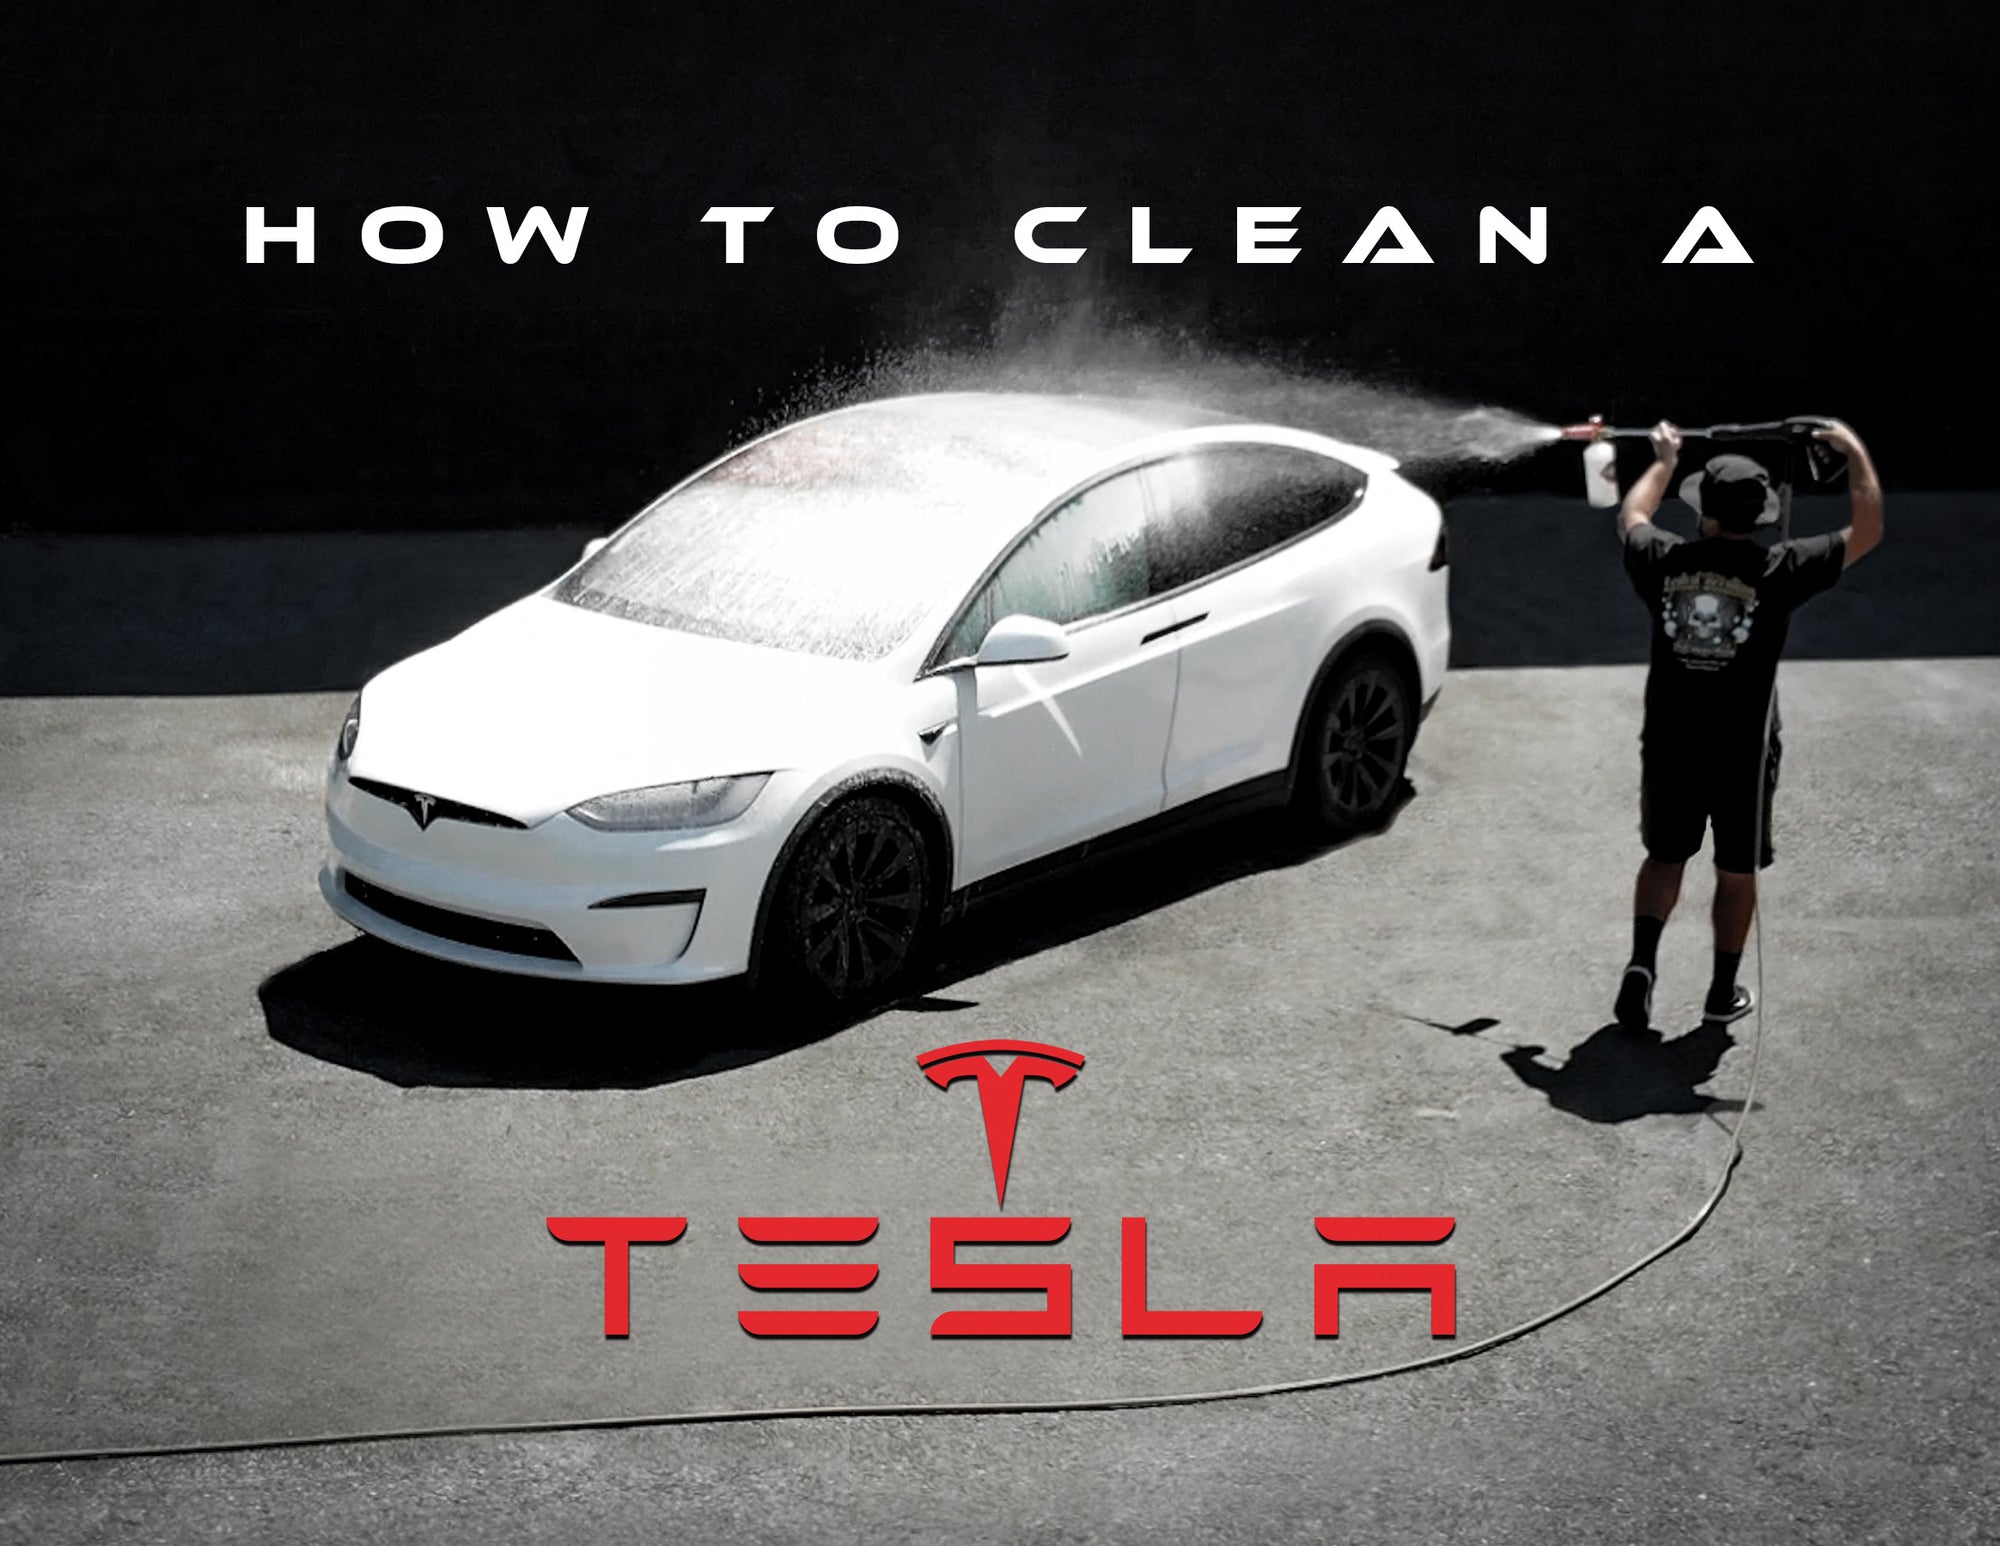 How to clean a Tesla